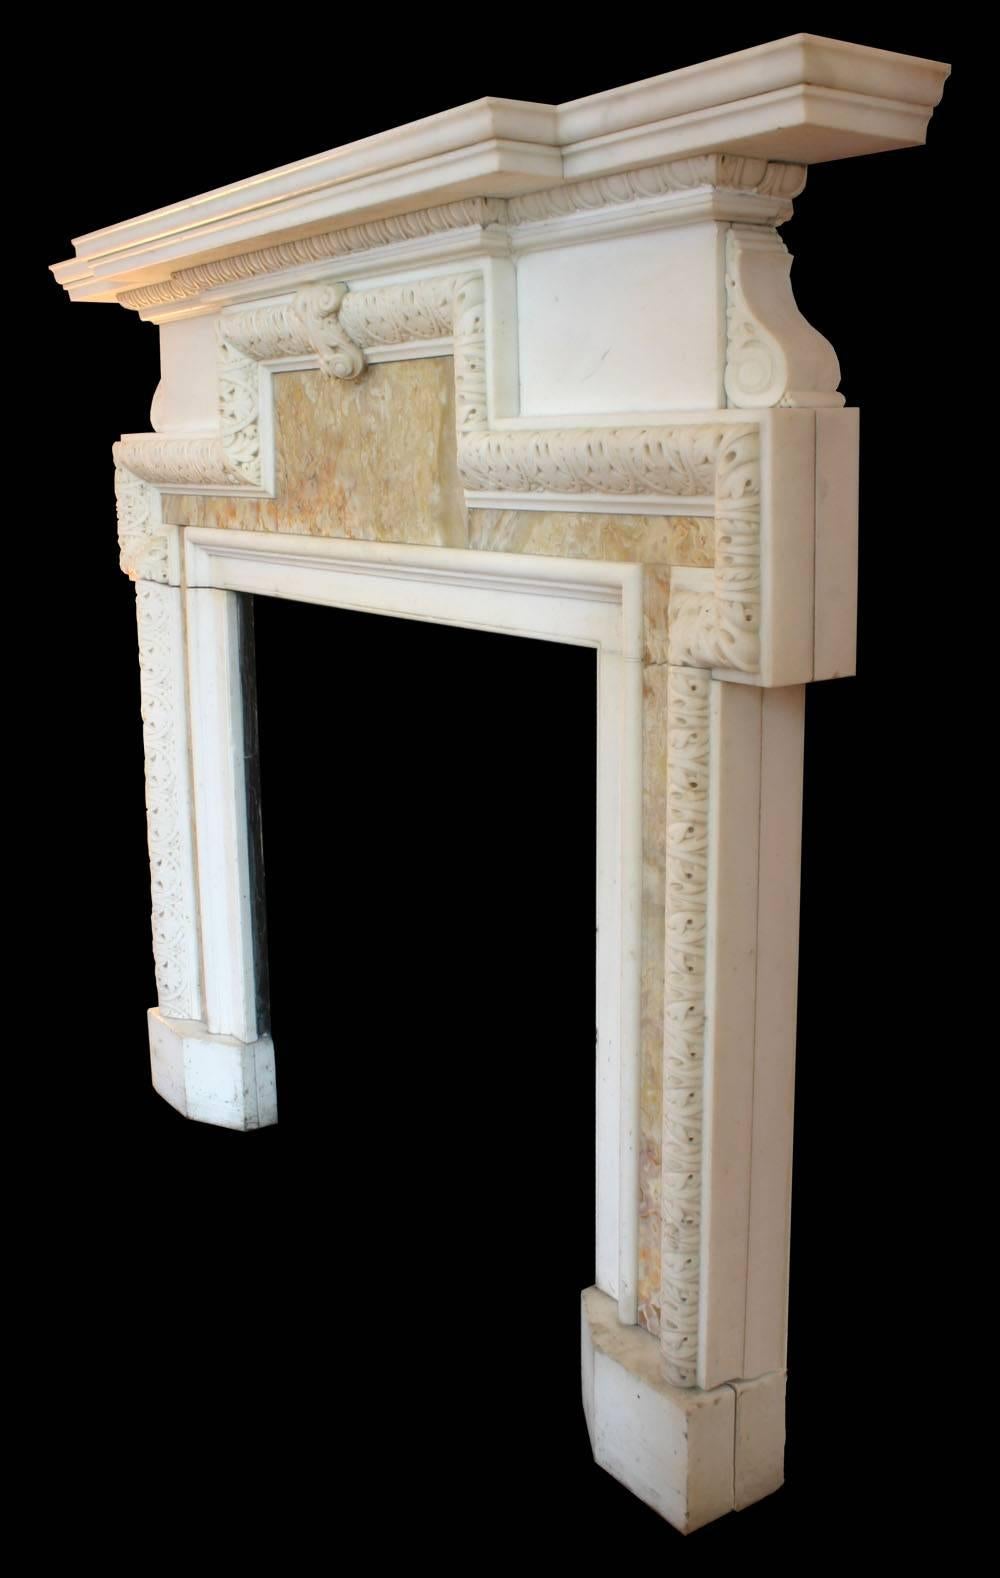 Very fine antique Georgian statuary white marble chimneypiece with elaborately carved eared moldings which enclose specimen onyx panels. Images prior to restoration. When this fireplace is purchased it will then be fully restored. The price listed